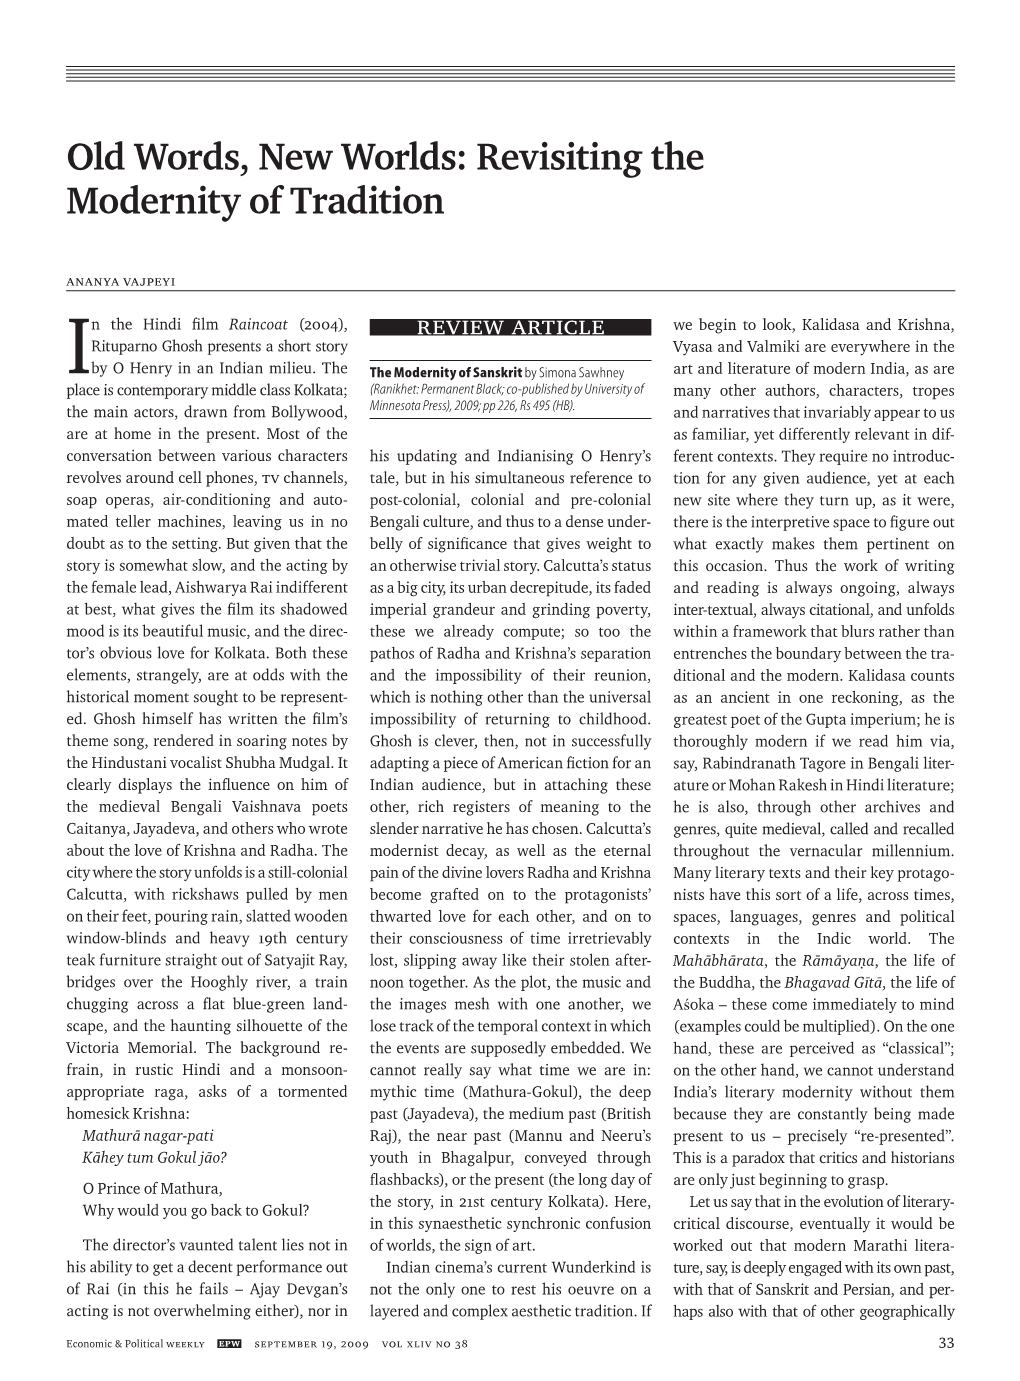 Old Words, New Worlds: Revisiting the Modernity of Tradition